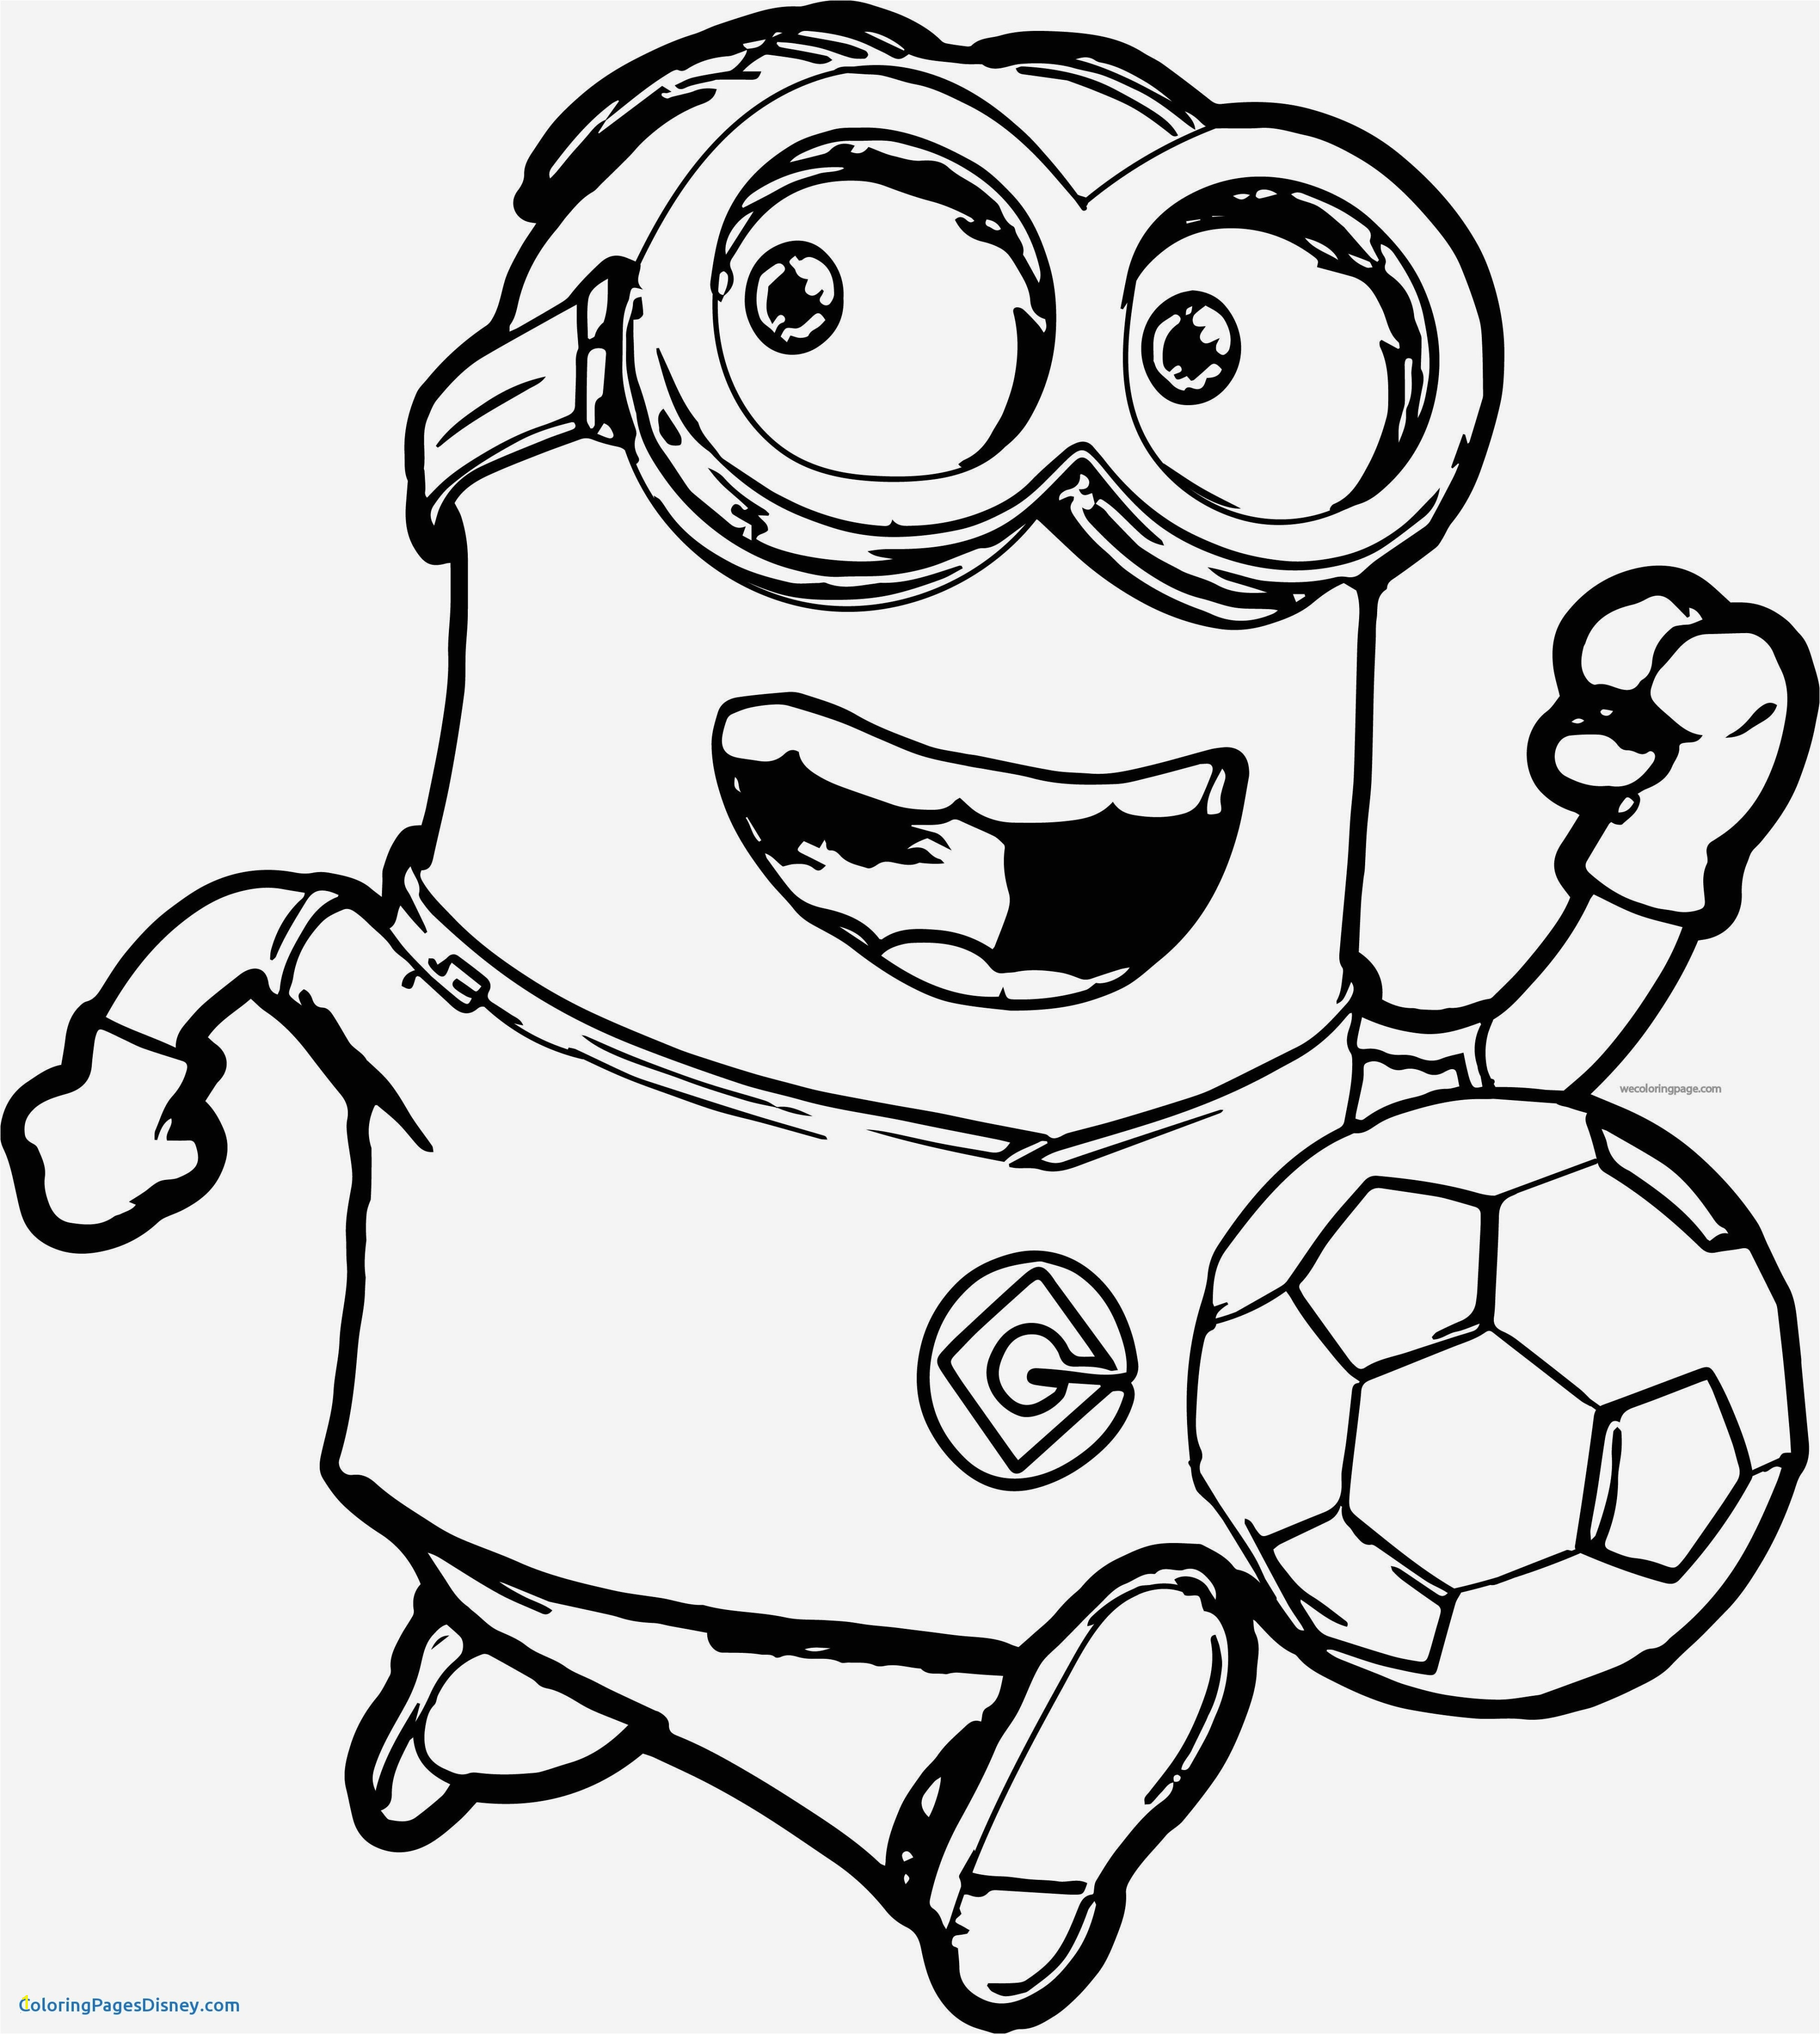 Minions Coloring Page New Minion Coloring Page Unique 49 New Gallery Minion Coloring Pages